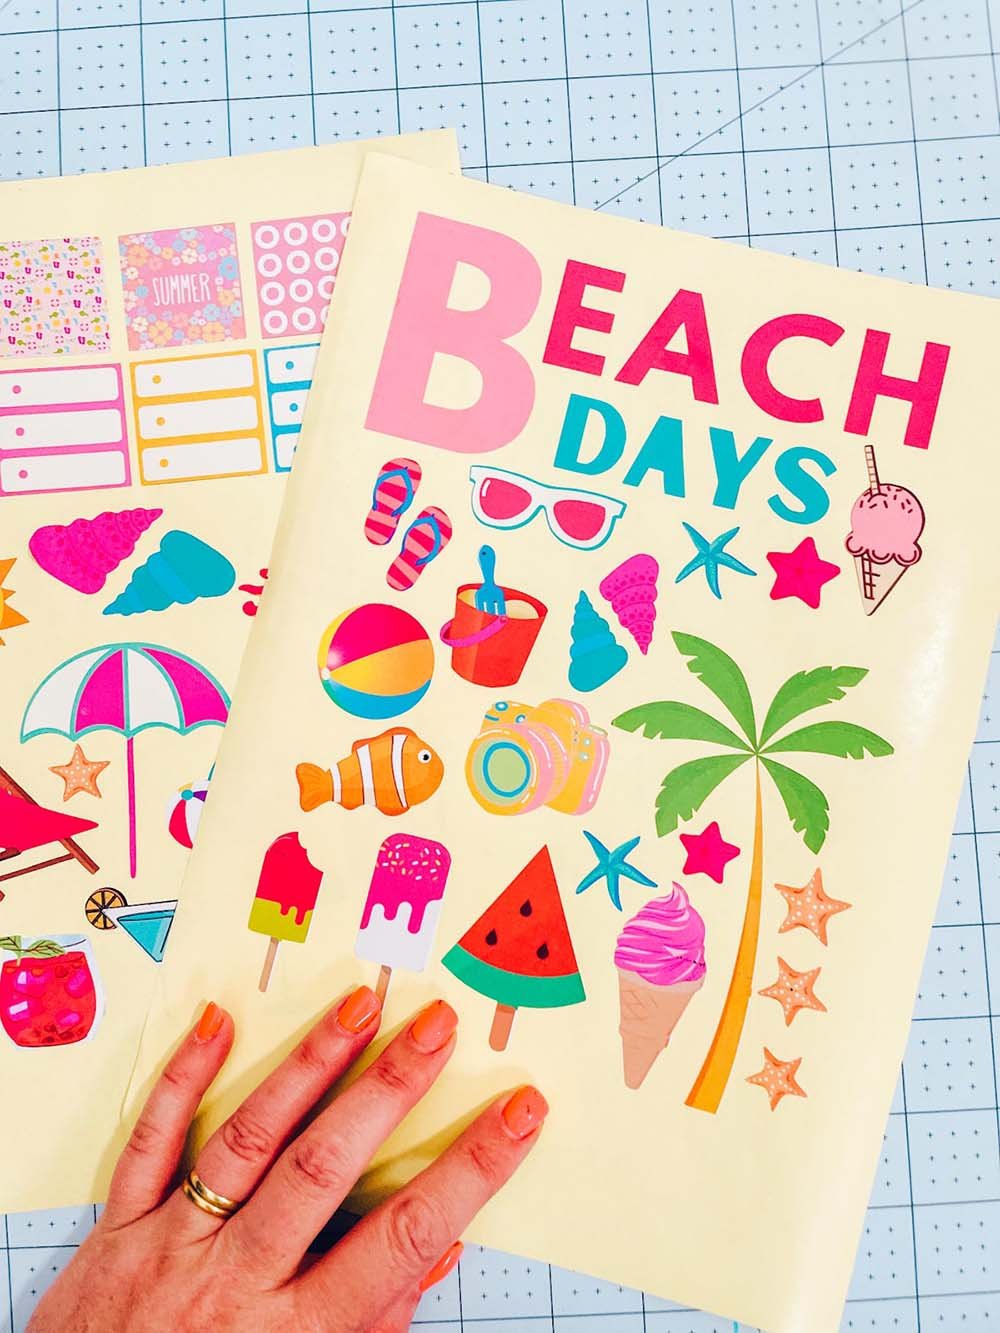 Printables for Beach Scrapbook layouts